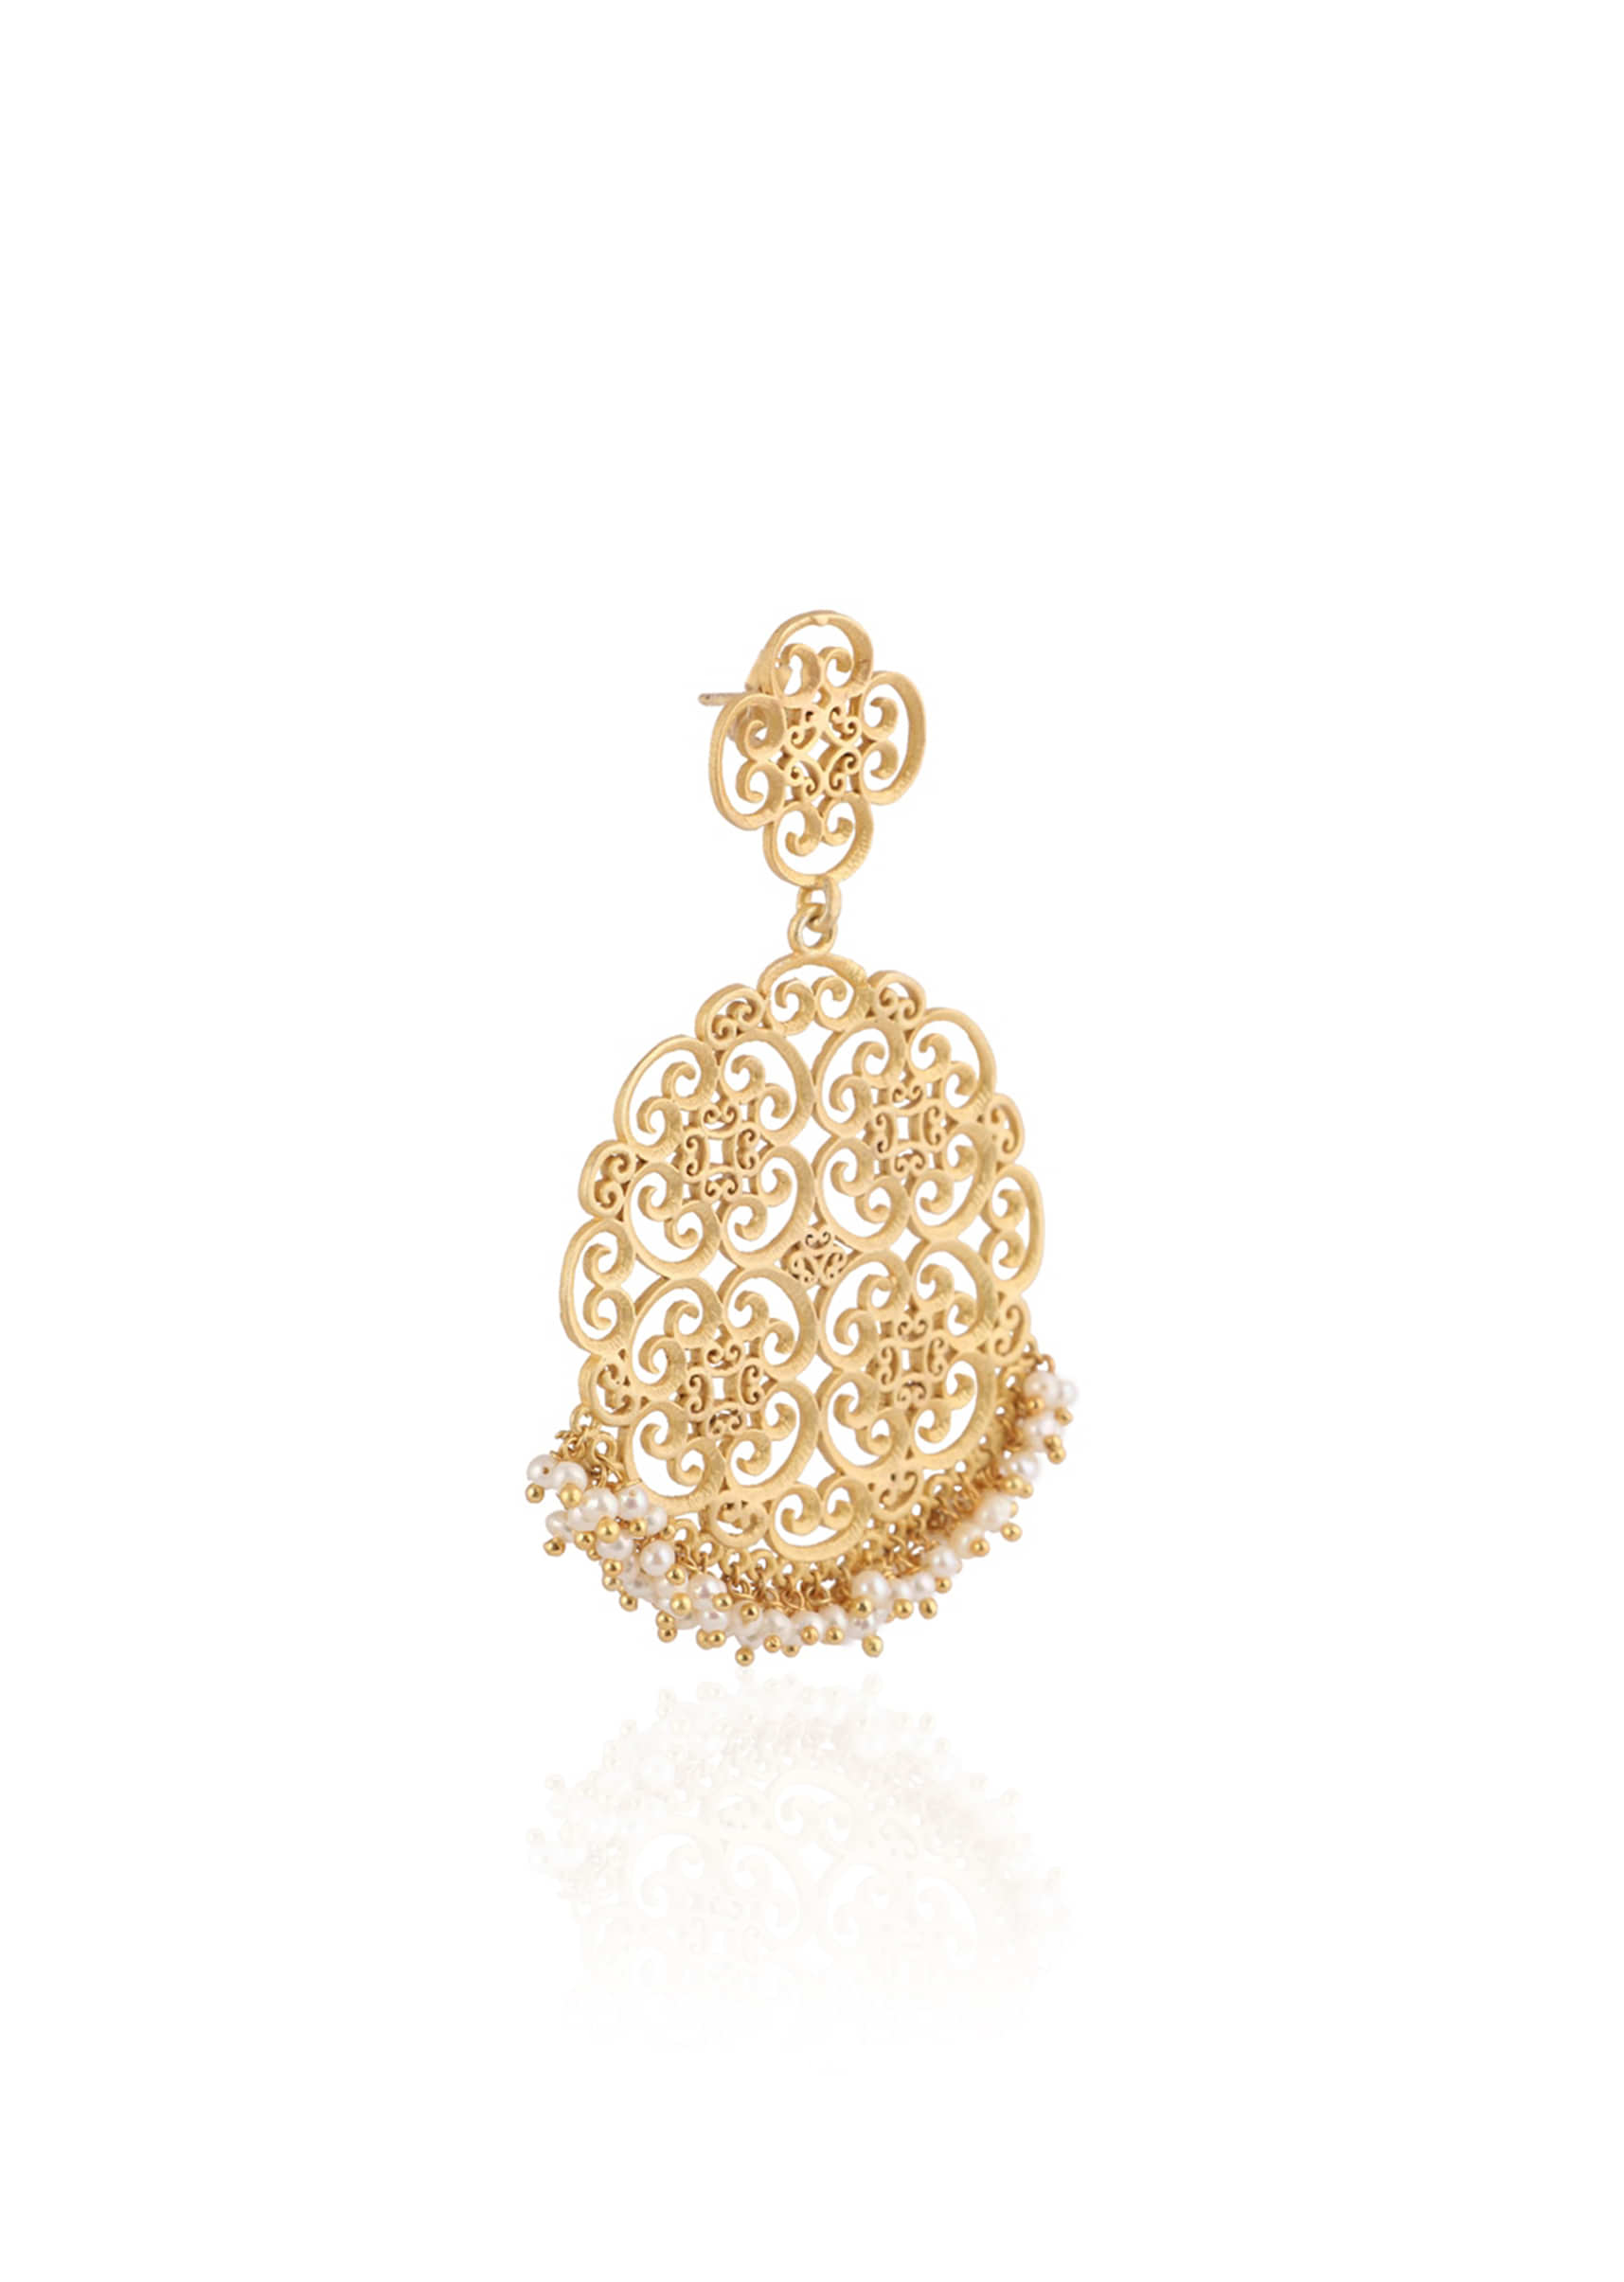 Gold Plated Oversized Disc Earrings With Delicate Filigree Detailing And Pearls By Zariin